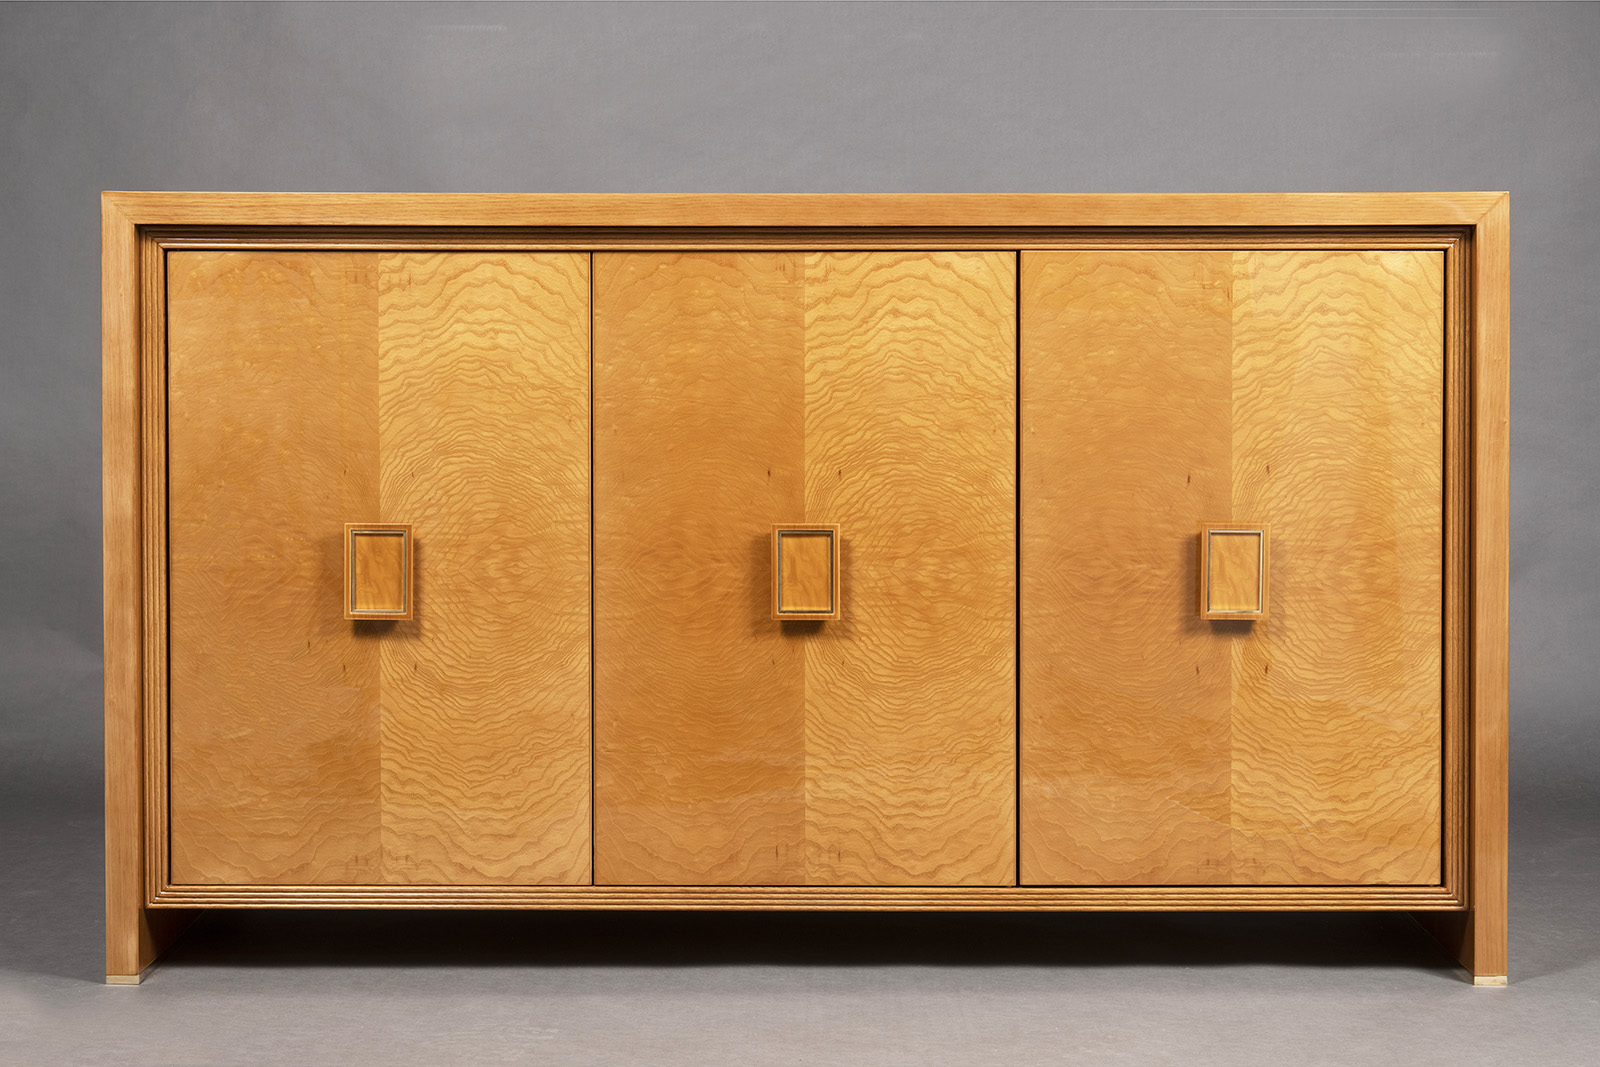 A French Modernist Style Sideboard by ILIAD Design